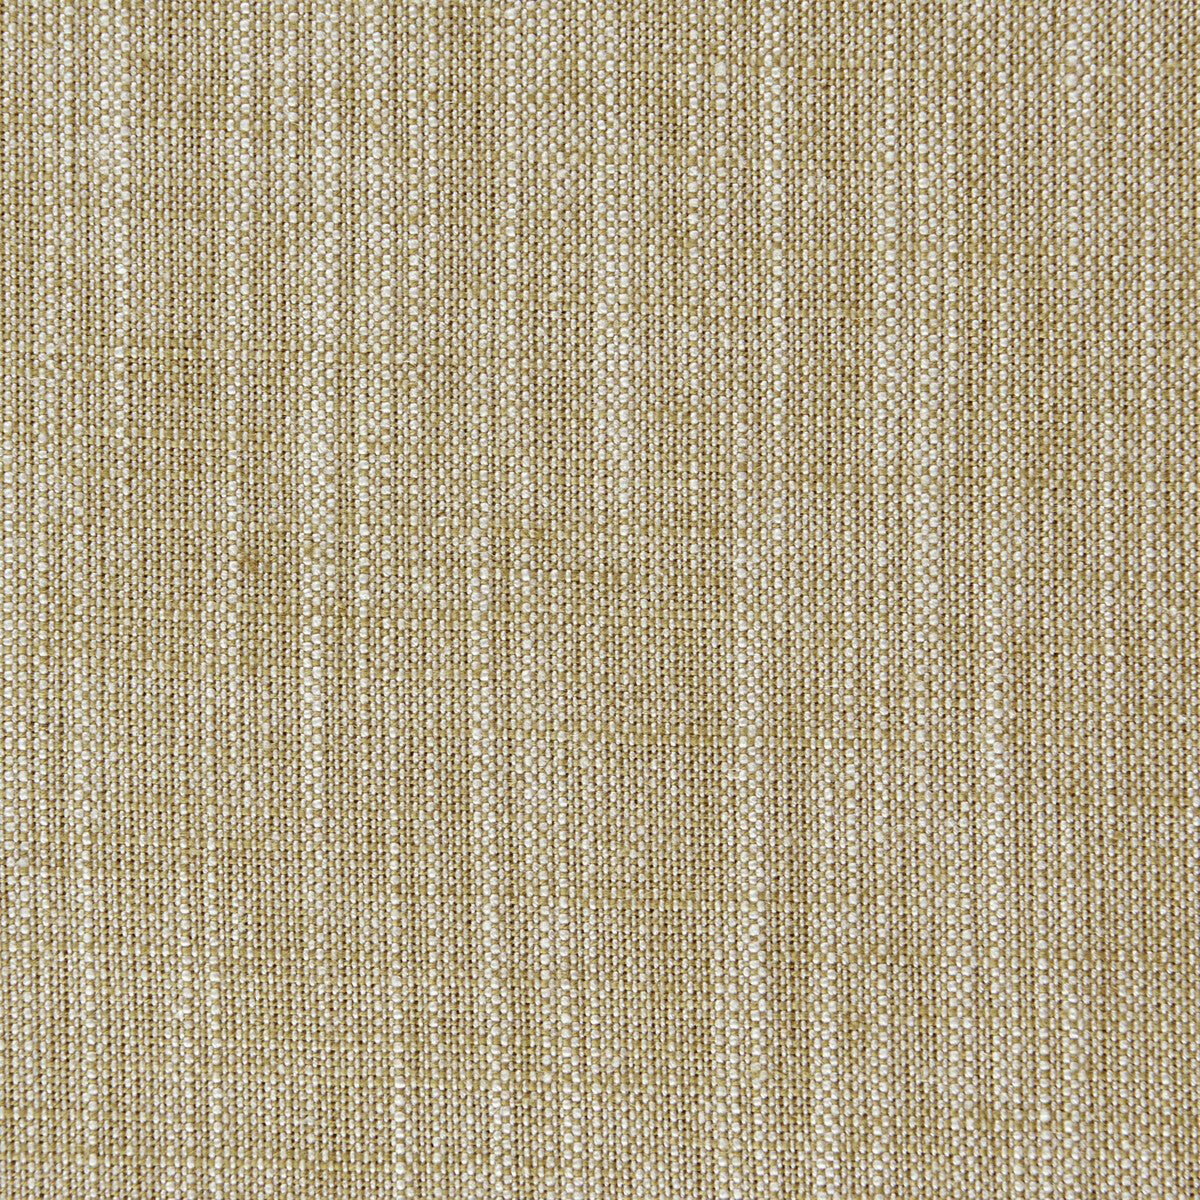 Biarritz fabric in sand color - pattern F0965/40.CAC.0 - by Clarke And Clarke in the Clarke &amp; Clarke Biarritz collection